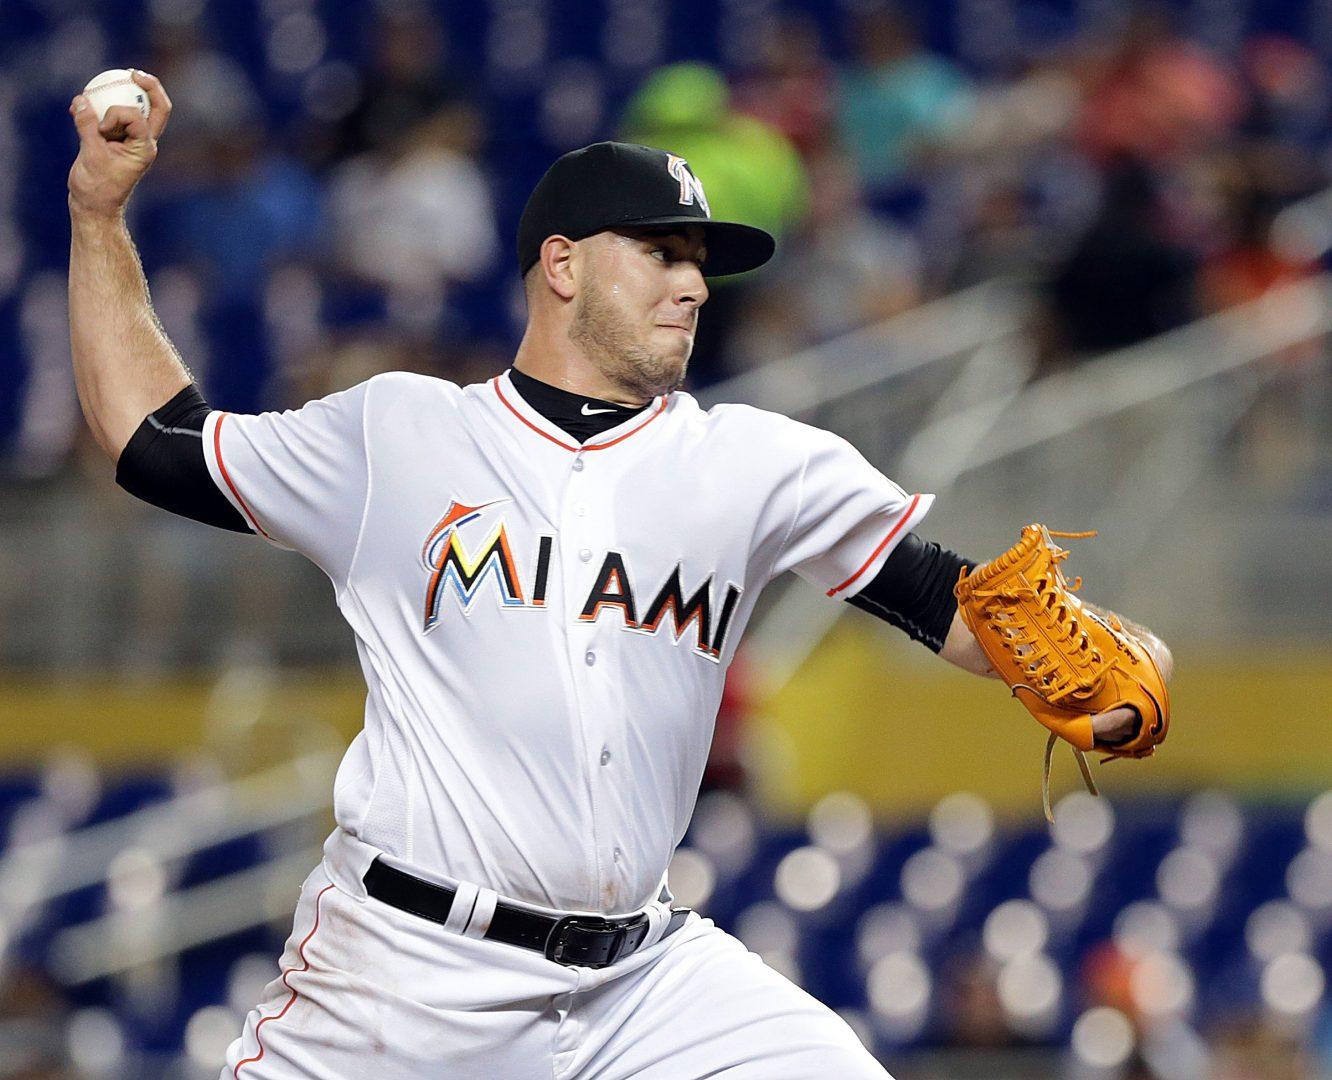 The Miami Marlins Jose Fernandez pitches in the first inning against the Los Angeles Dodgers at Marlins Park in Miami on Thursday, Sept. 9, 2016. (Pedro Portal/Miami Herald/TNS)